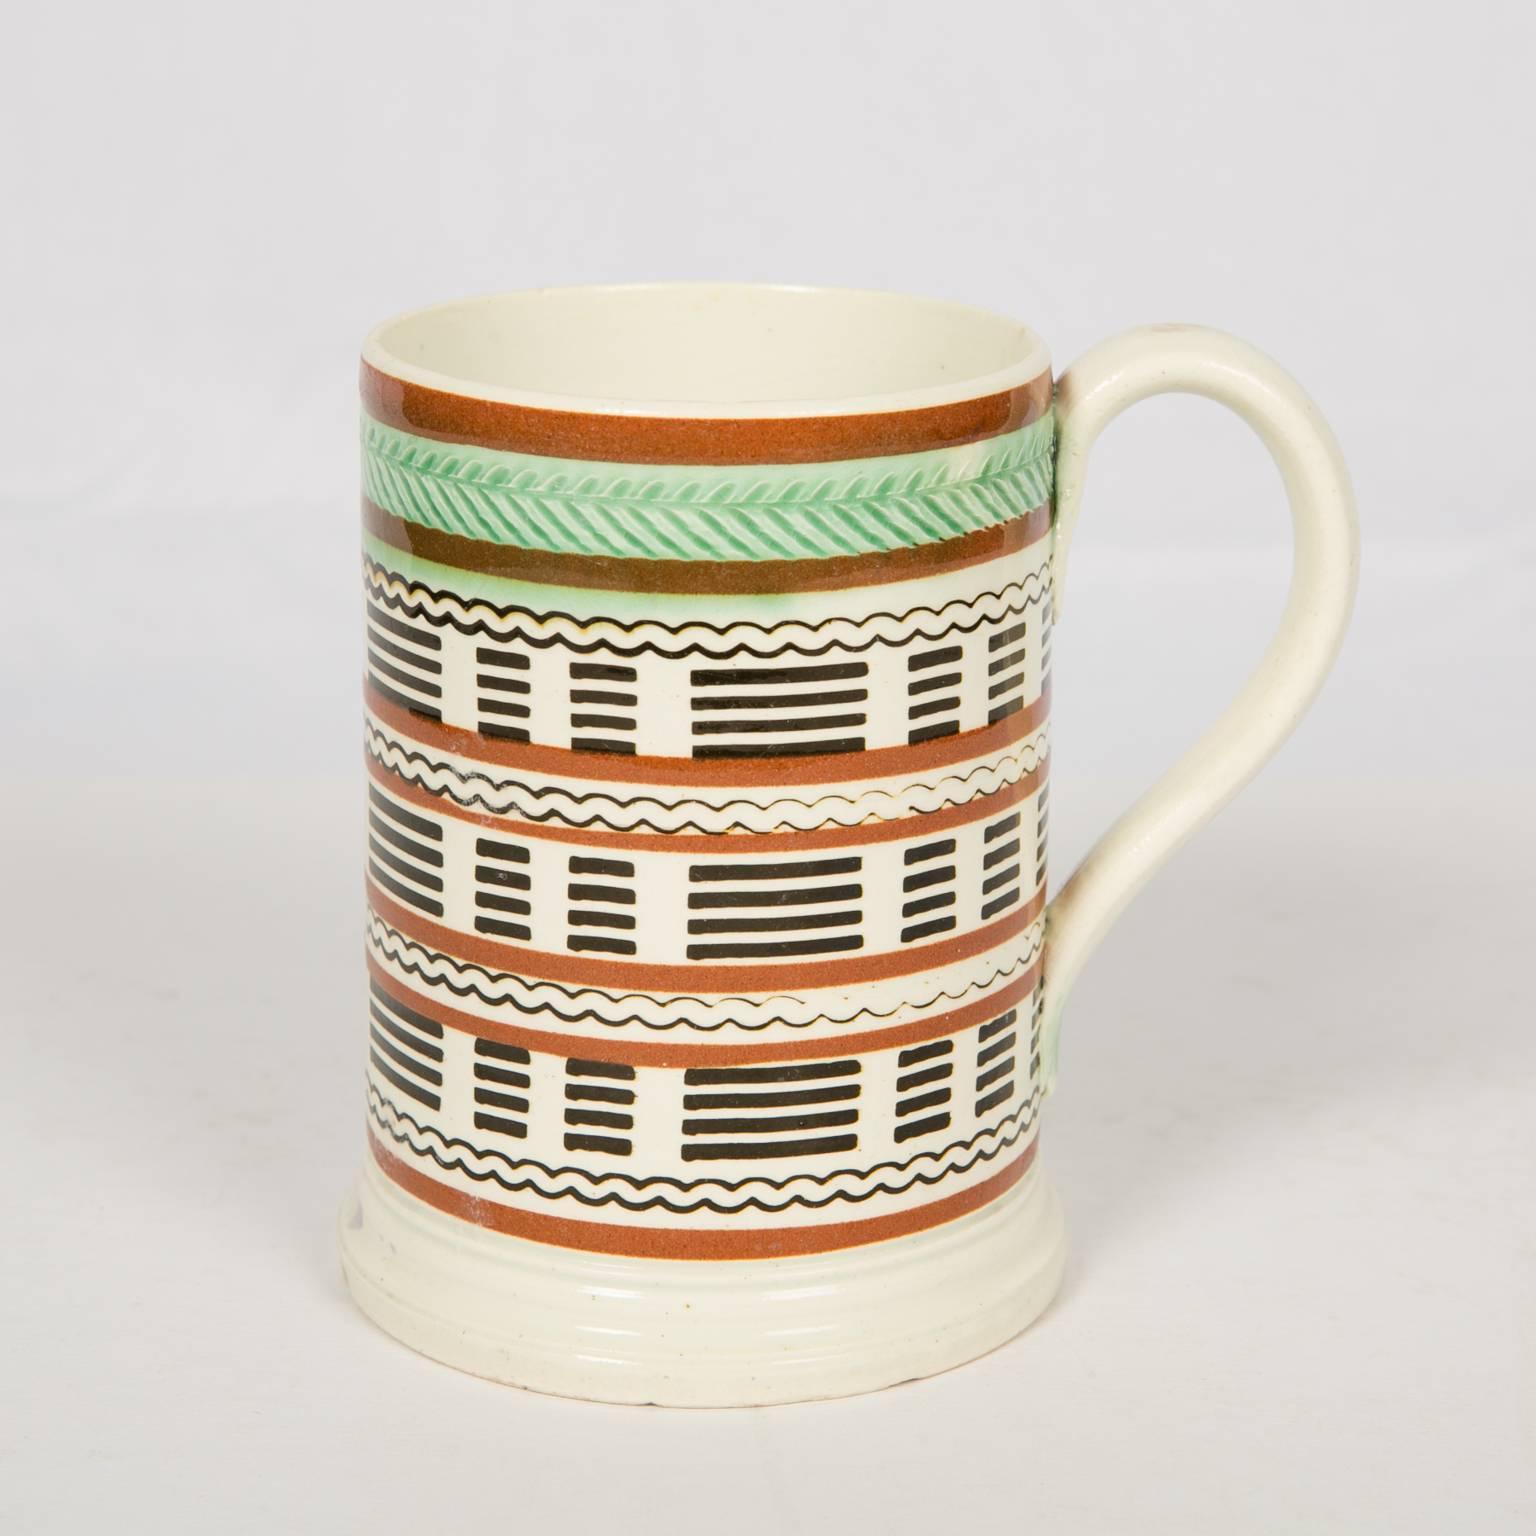 Provenance:
Mr. and Mrs. Jerome Blum
Russell Scheider Antiques

A pearlware half pint mug decorated with double bands of light brown slip and a band of green glazed herringbone rouletting at the mouth. Further decorated with straight and wavy